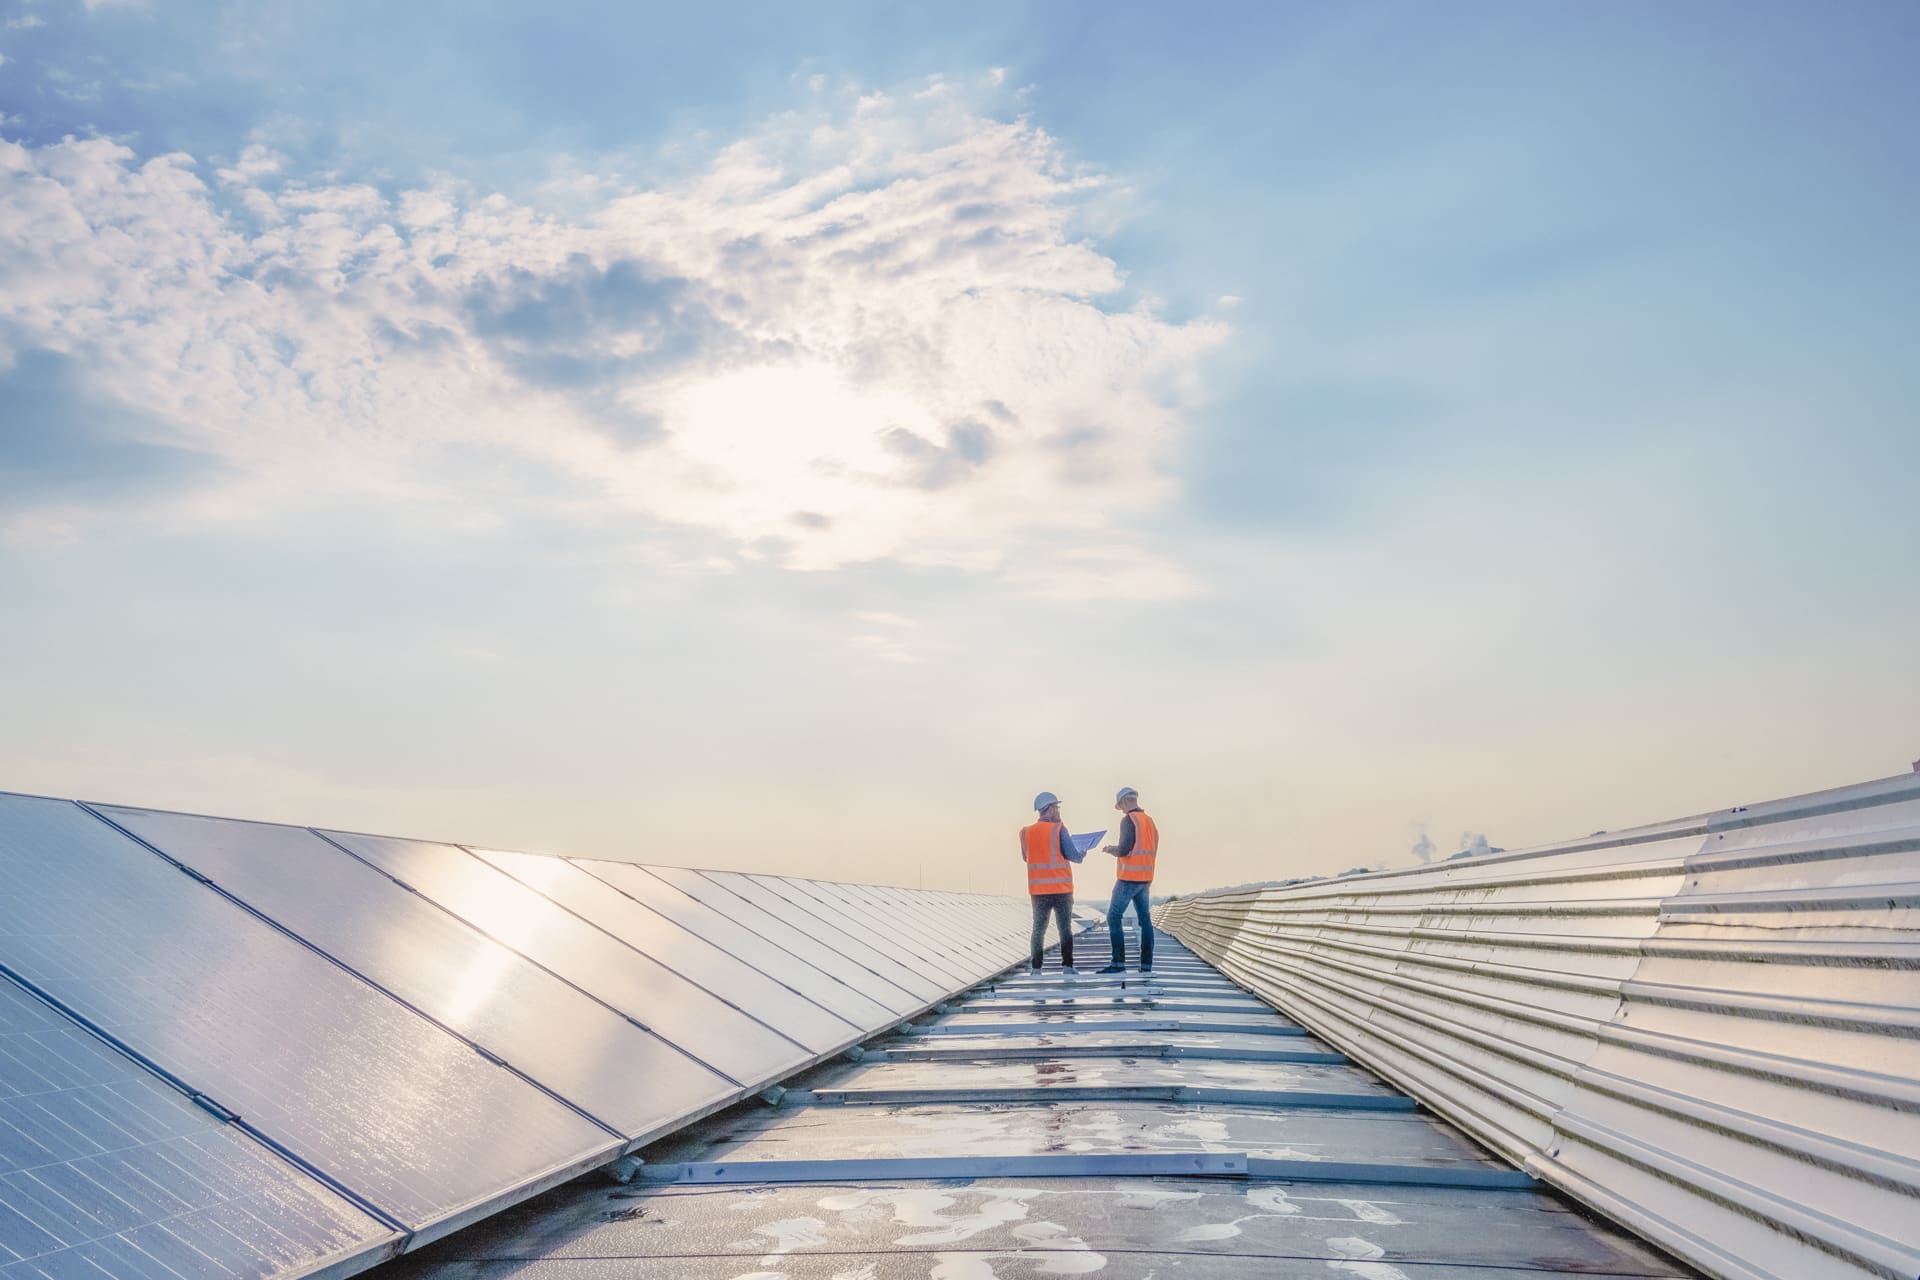 Two technicians in distance discussing between long rows of photovoltaic panels